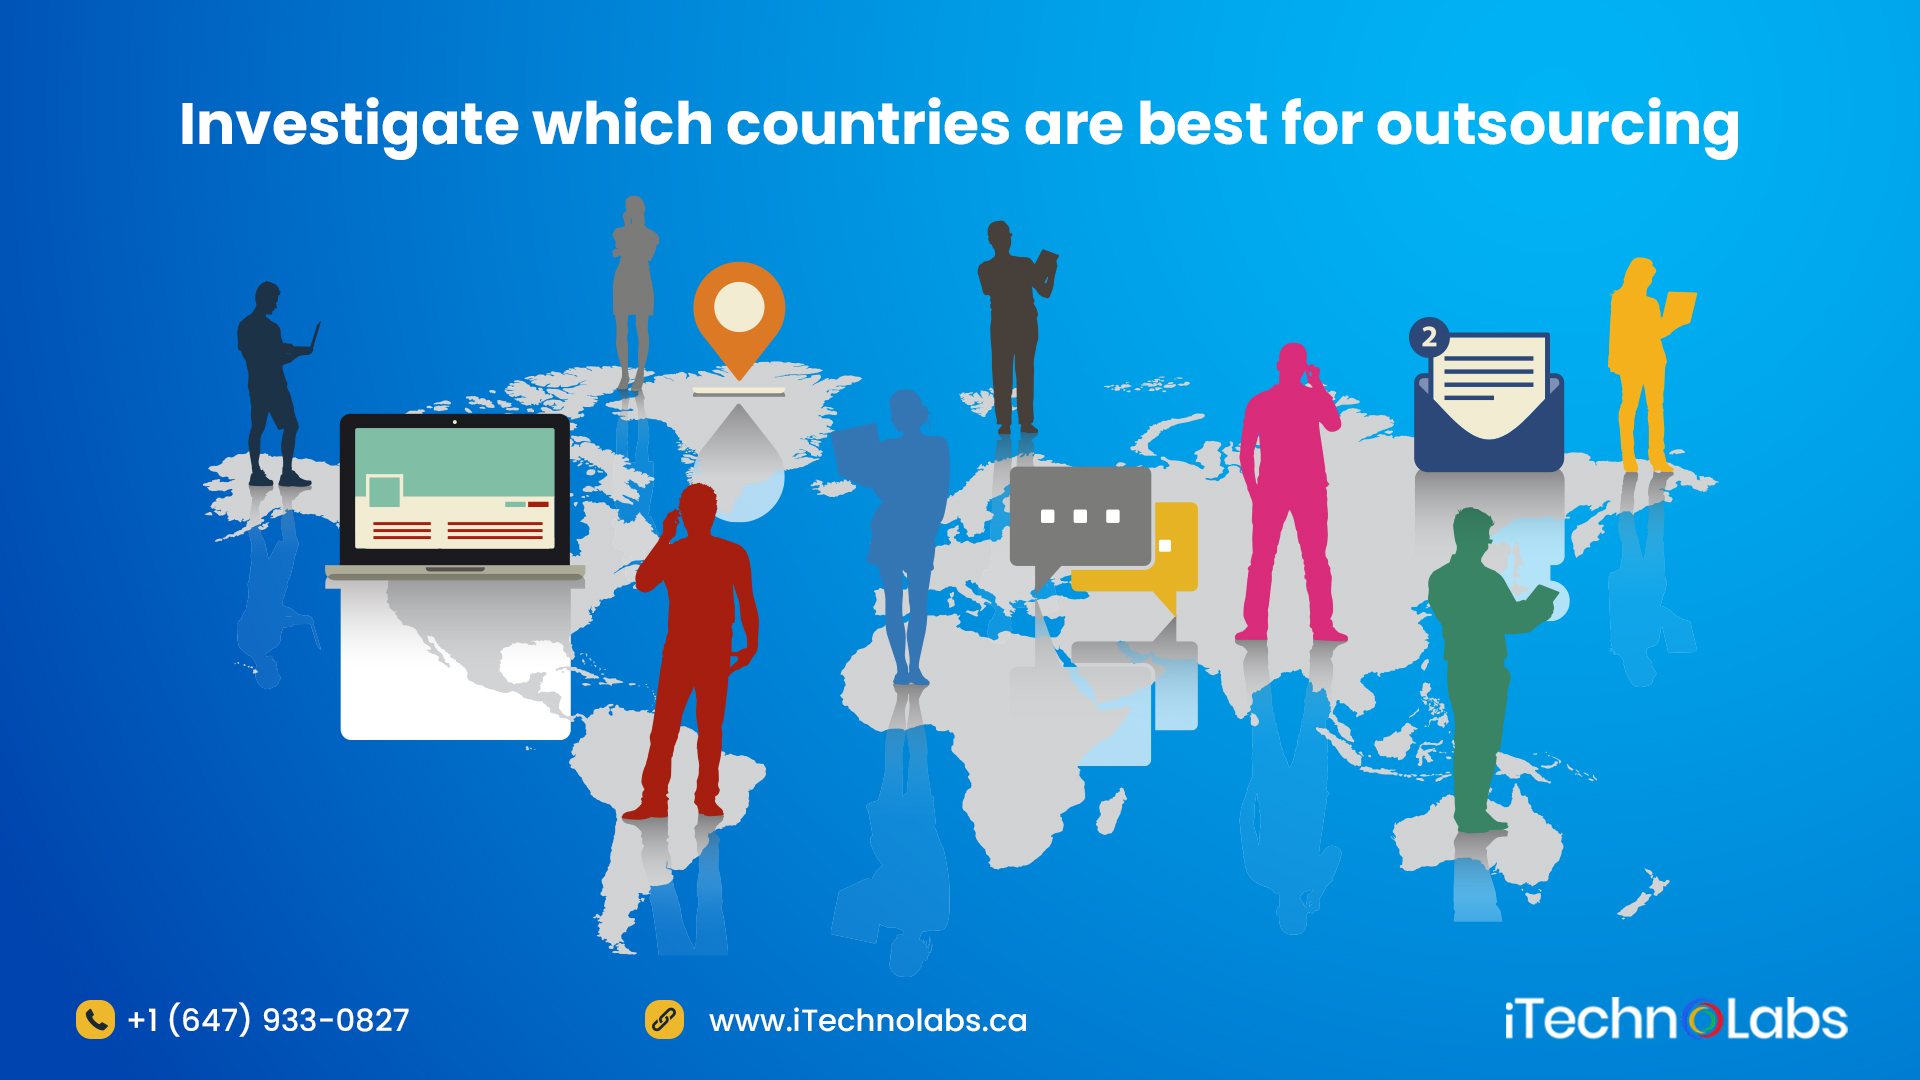 Investigate-which-countries-are-best-for-outsourcing-itechnolabs